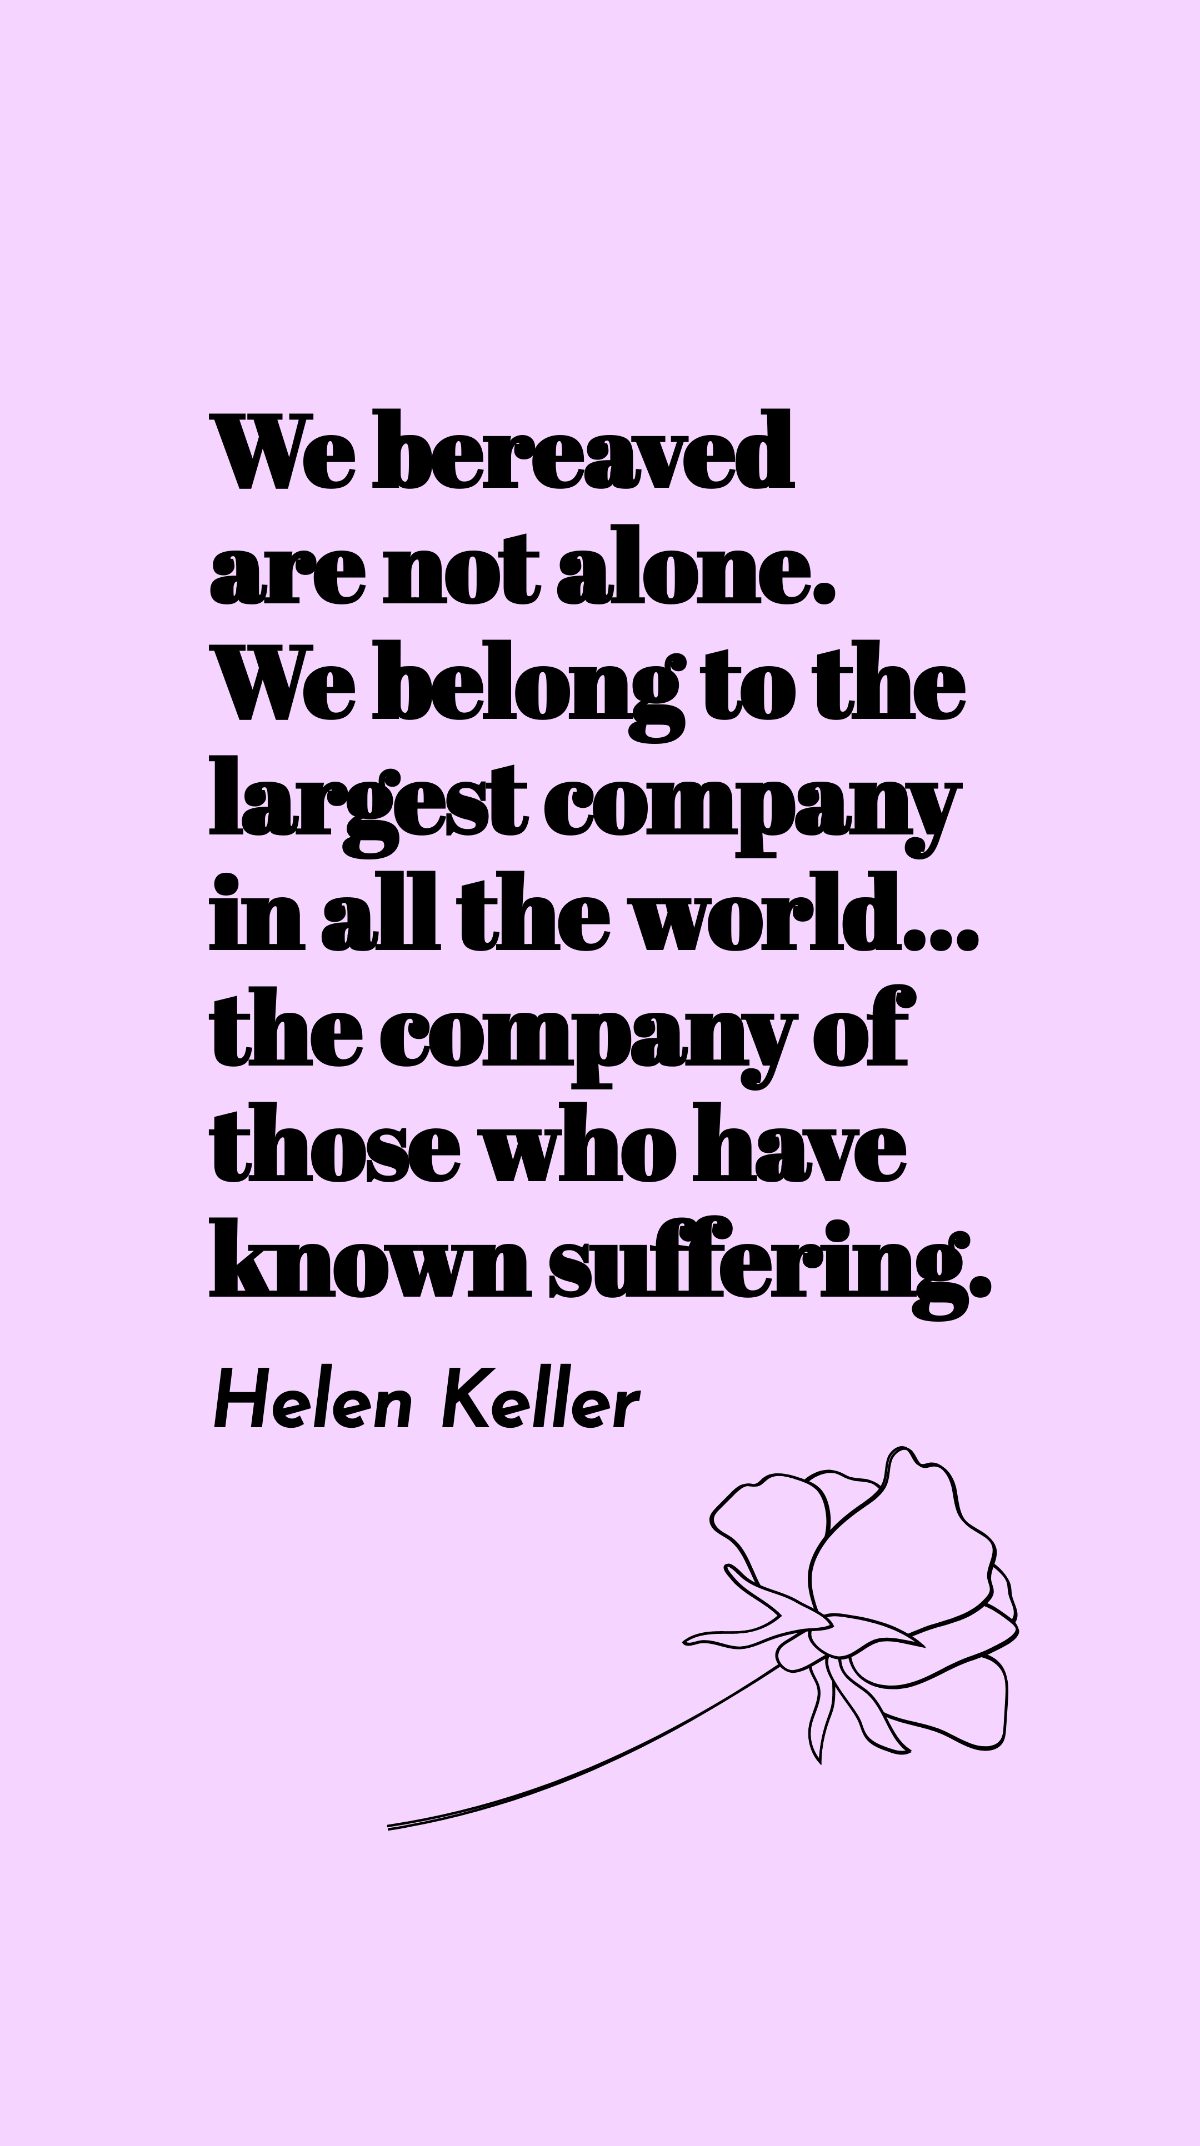 Helen Keller - We bereaved are not alone. We belong to the largest company in all the world… the company of those who have known suffering. Template